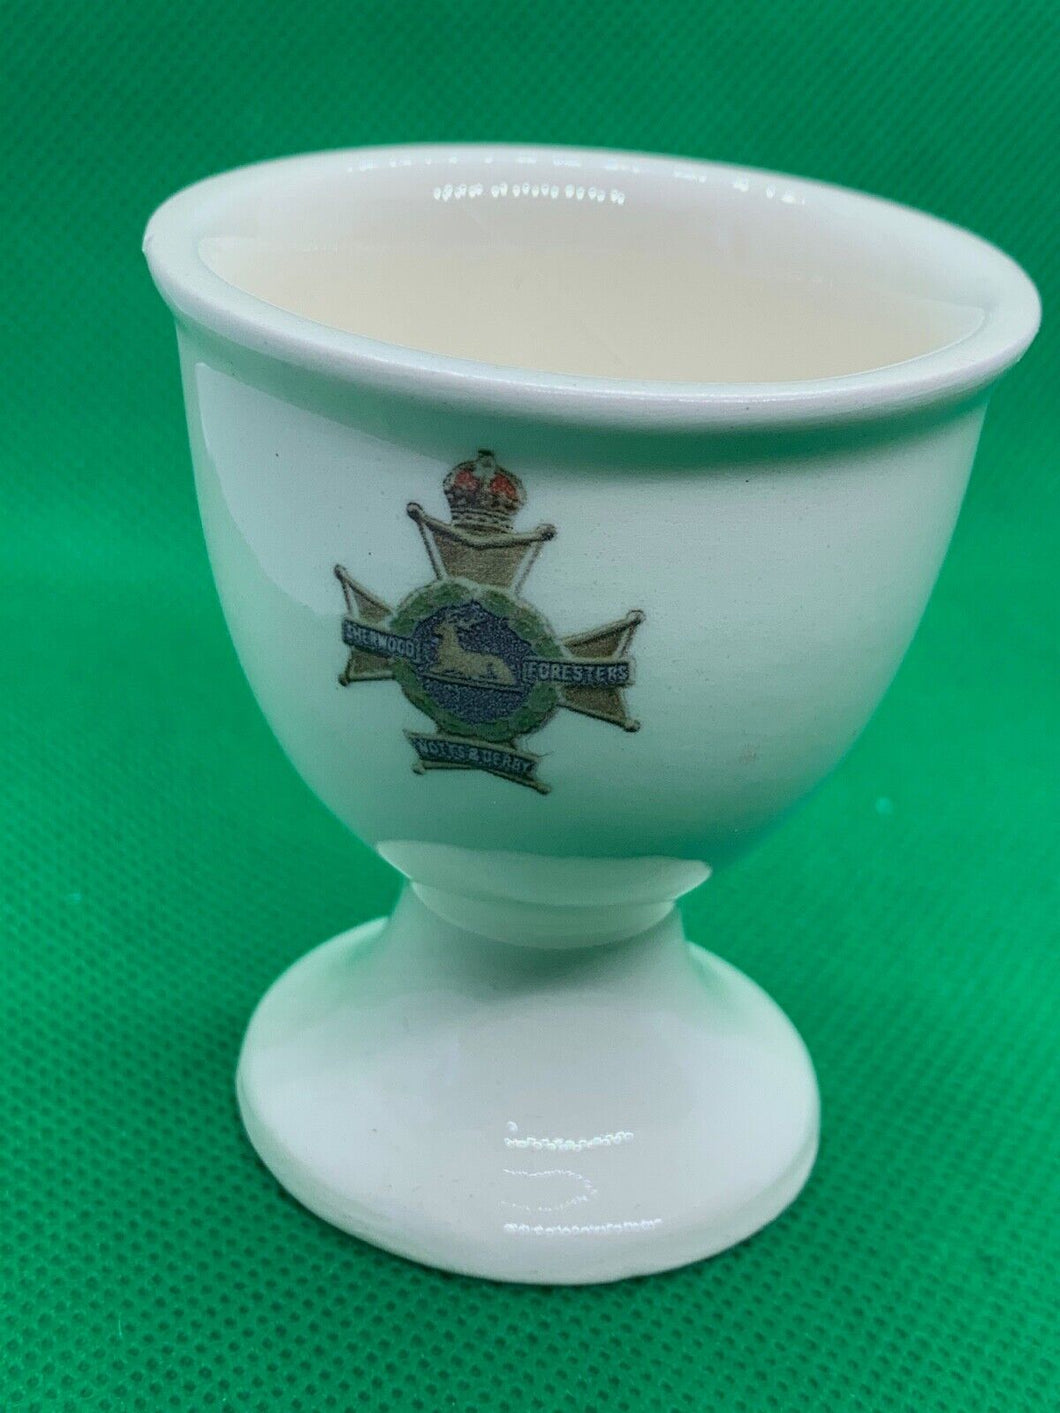 Badges of Empire Collectors Series Egg Cup - Sherwood Foresters - No 205